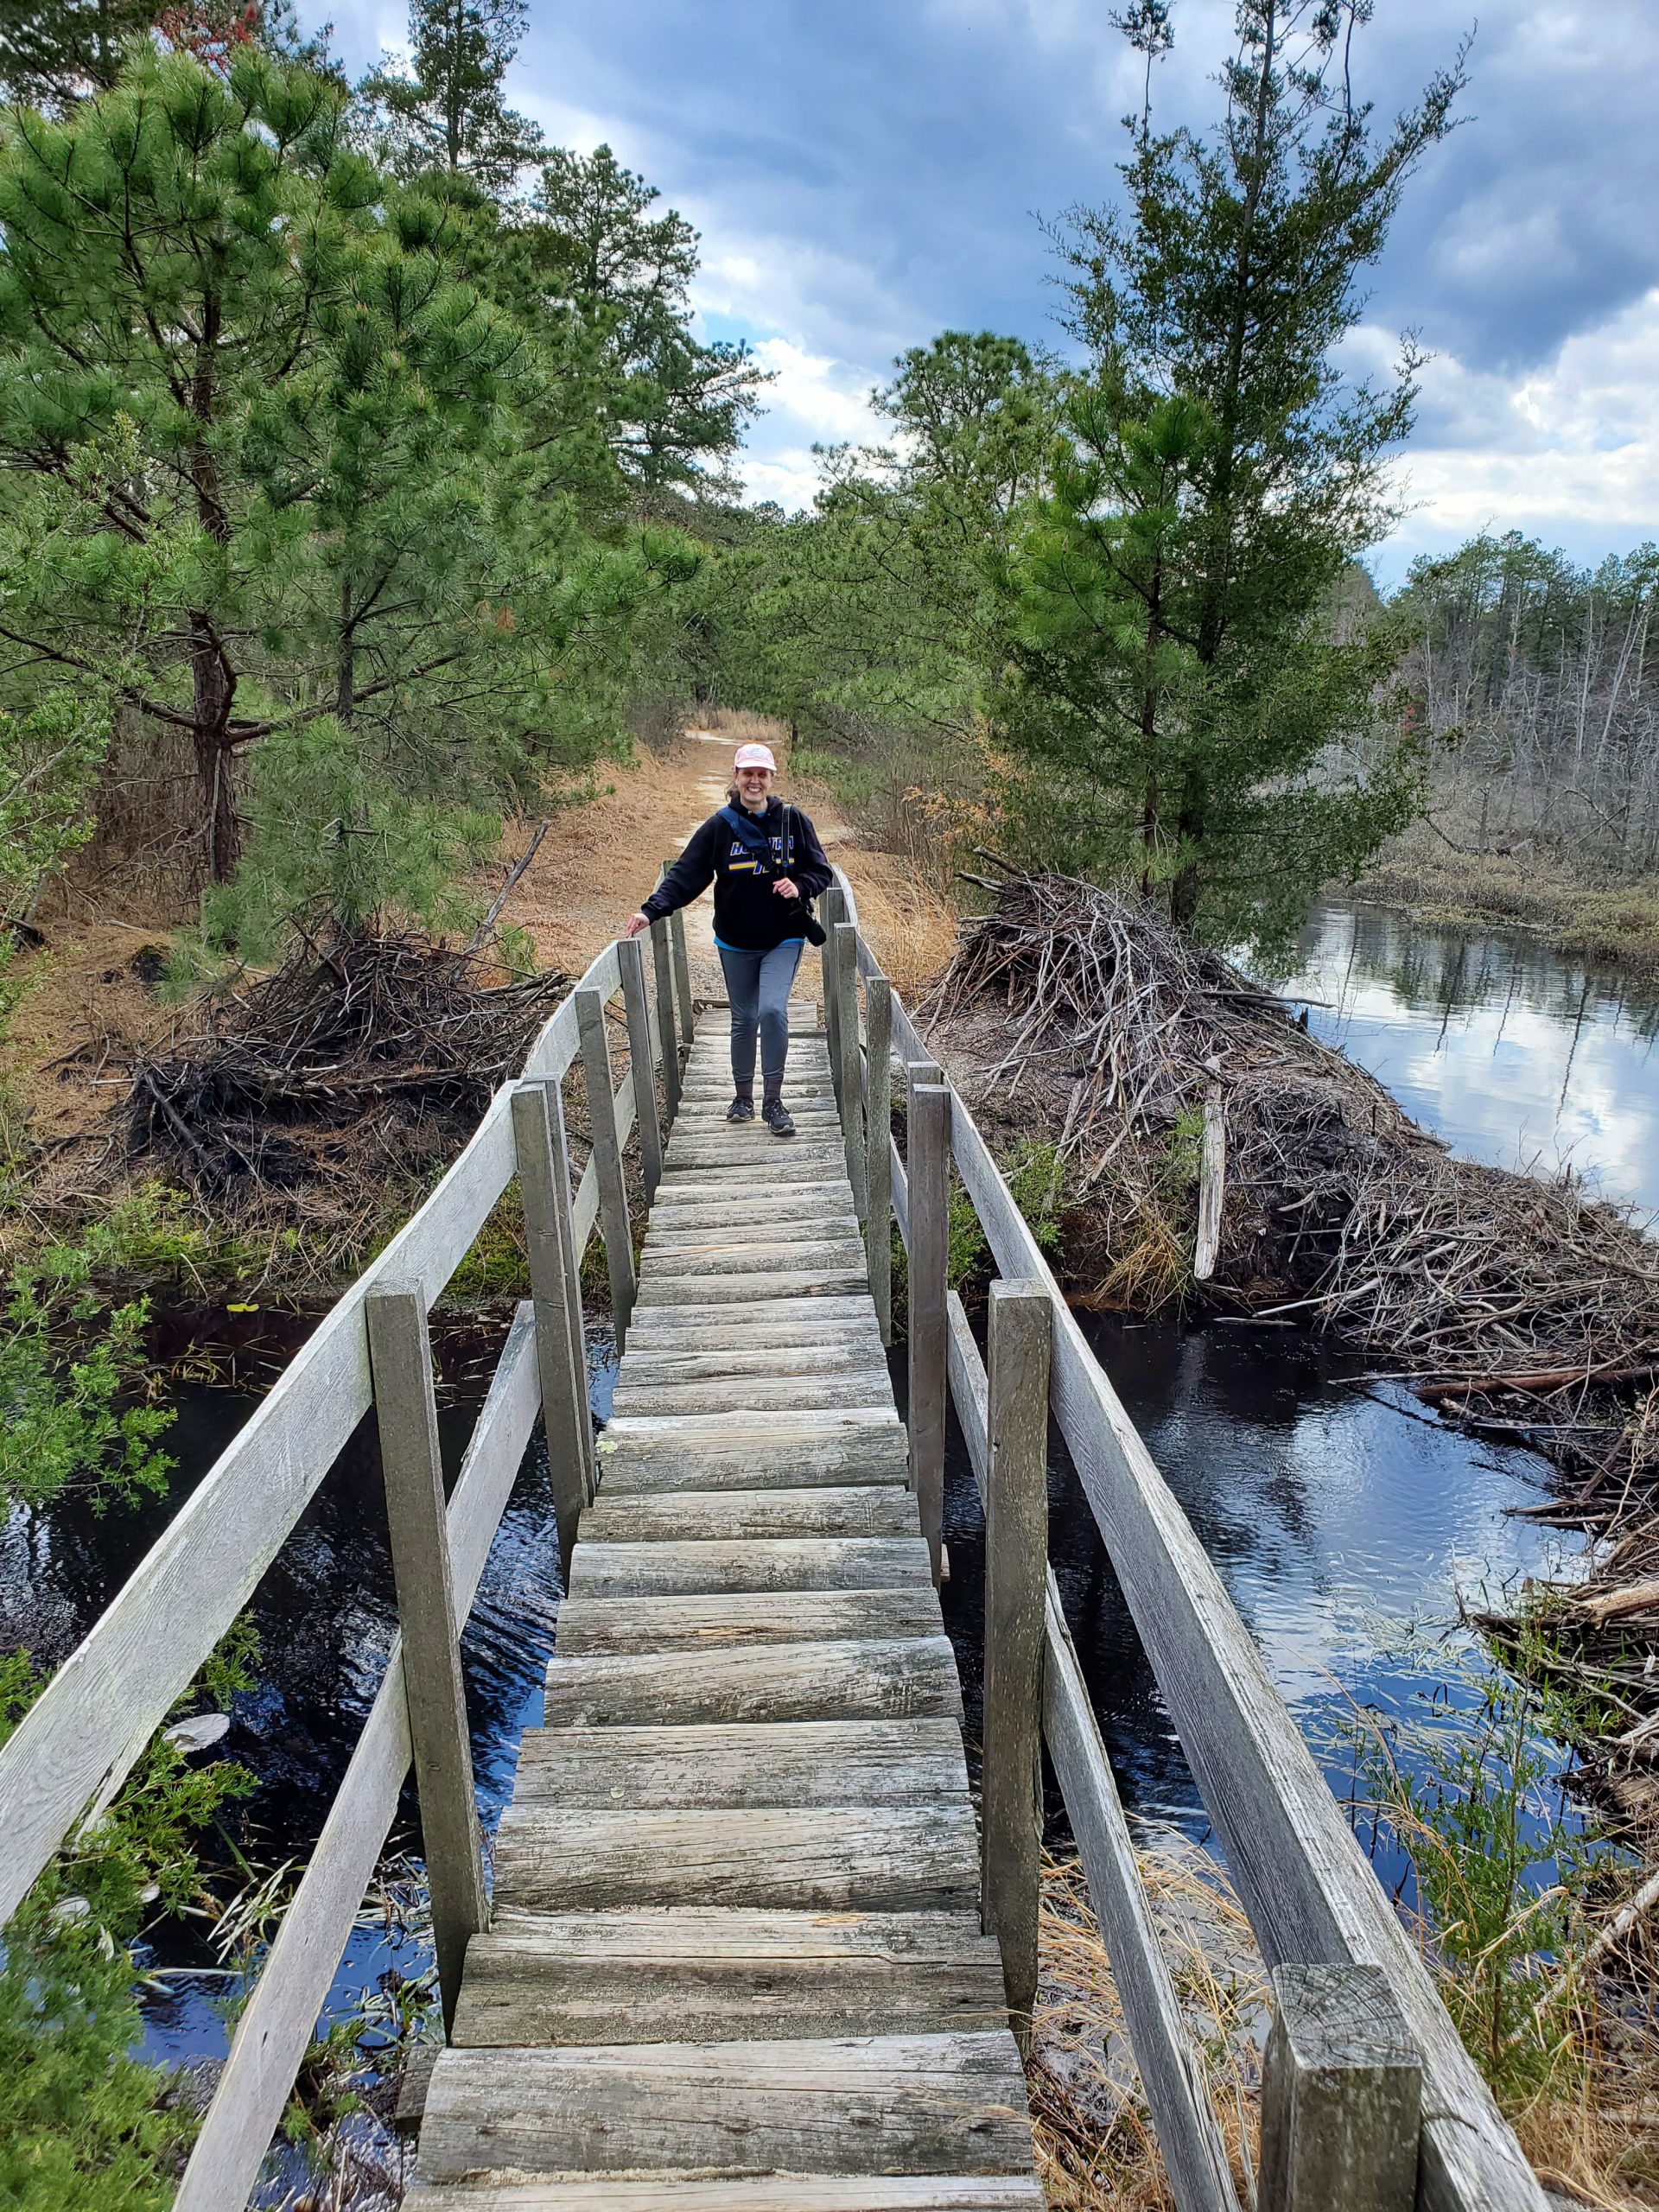 The author crossing a rough-hewn wooden bridge over water. Pine trees in the background.